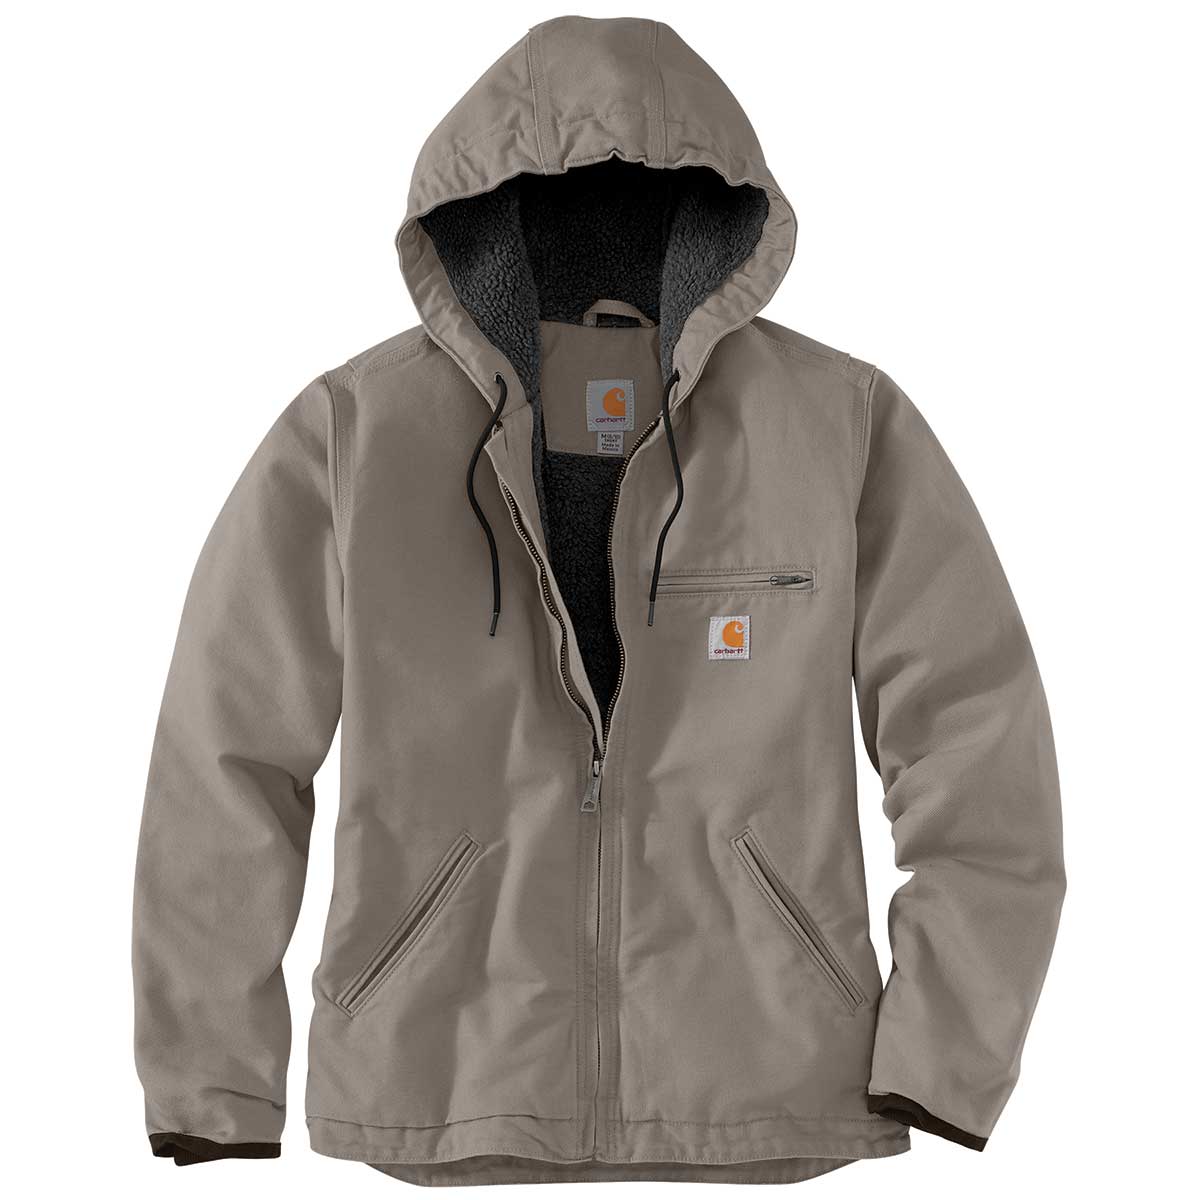 Carhartt Women's 0J141 Washed Duck Sherpa-Lined Jacket - XS / Taupe Gray